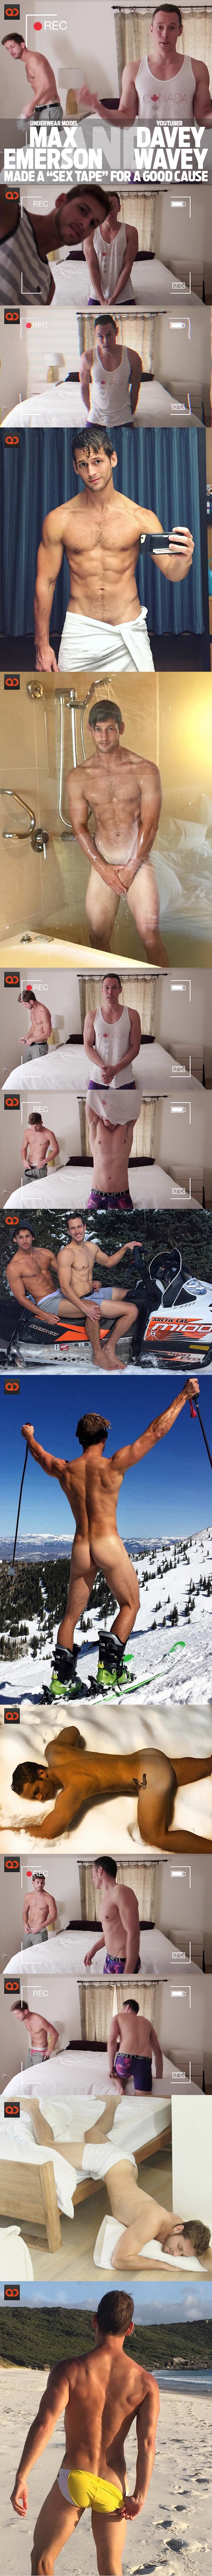 qc-max_emerson_and_davey_wavey_made_a_sex_tape_for_a_good_cause-collage01